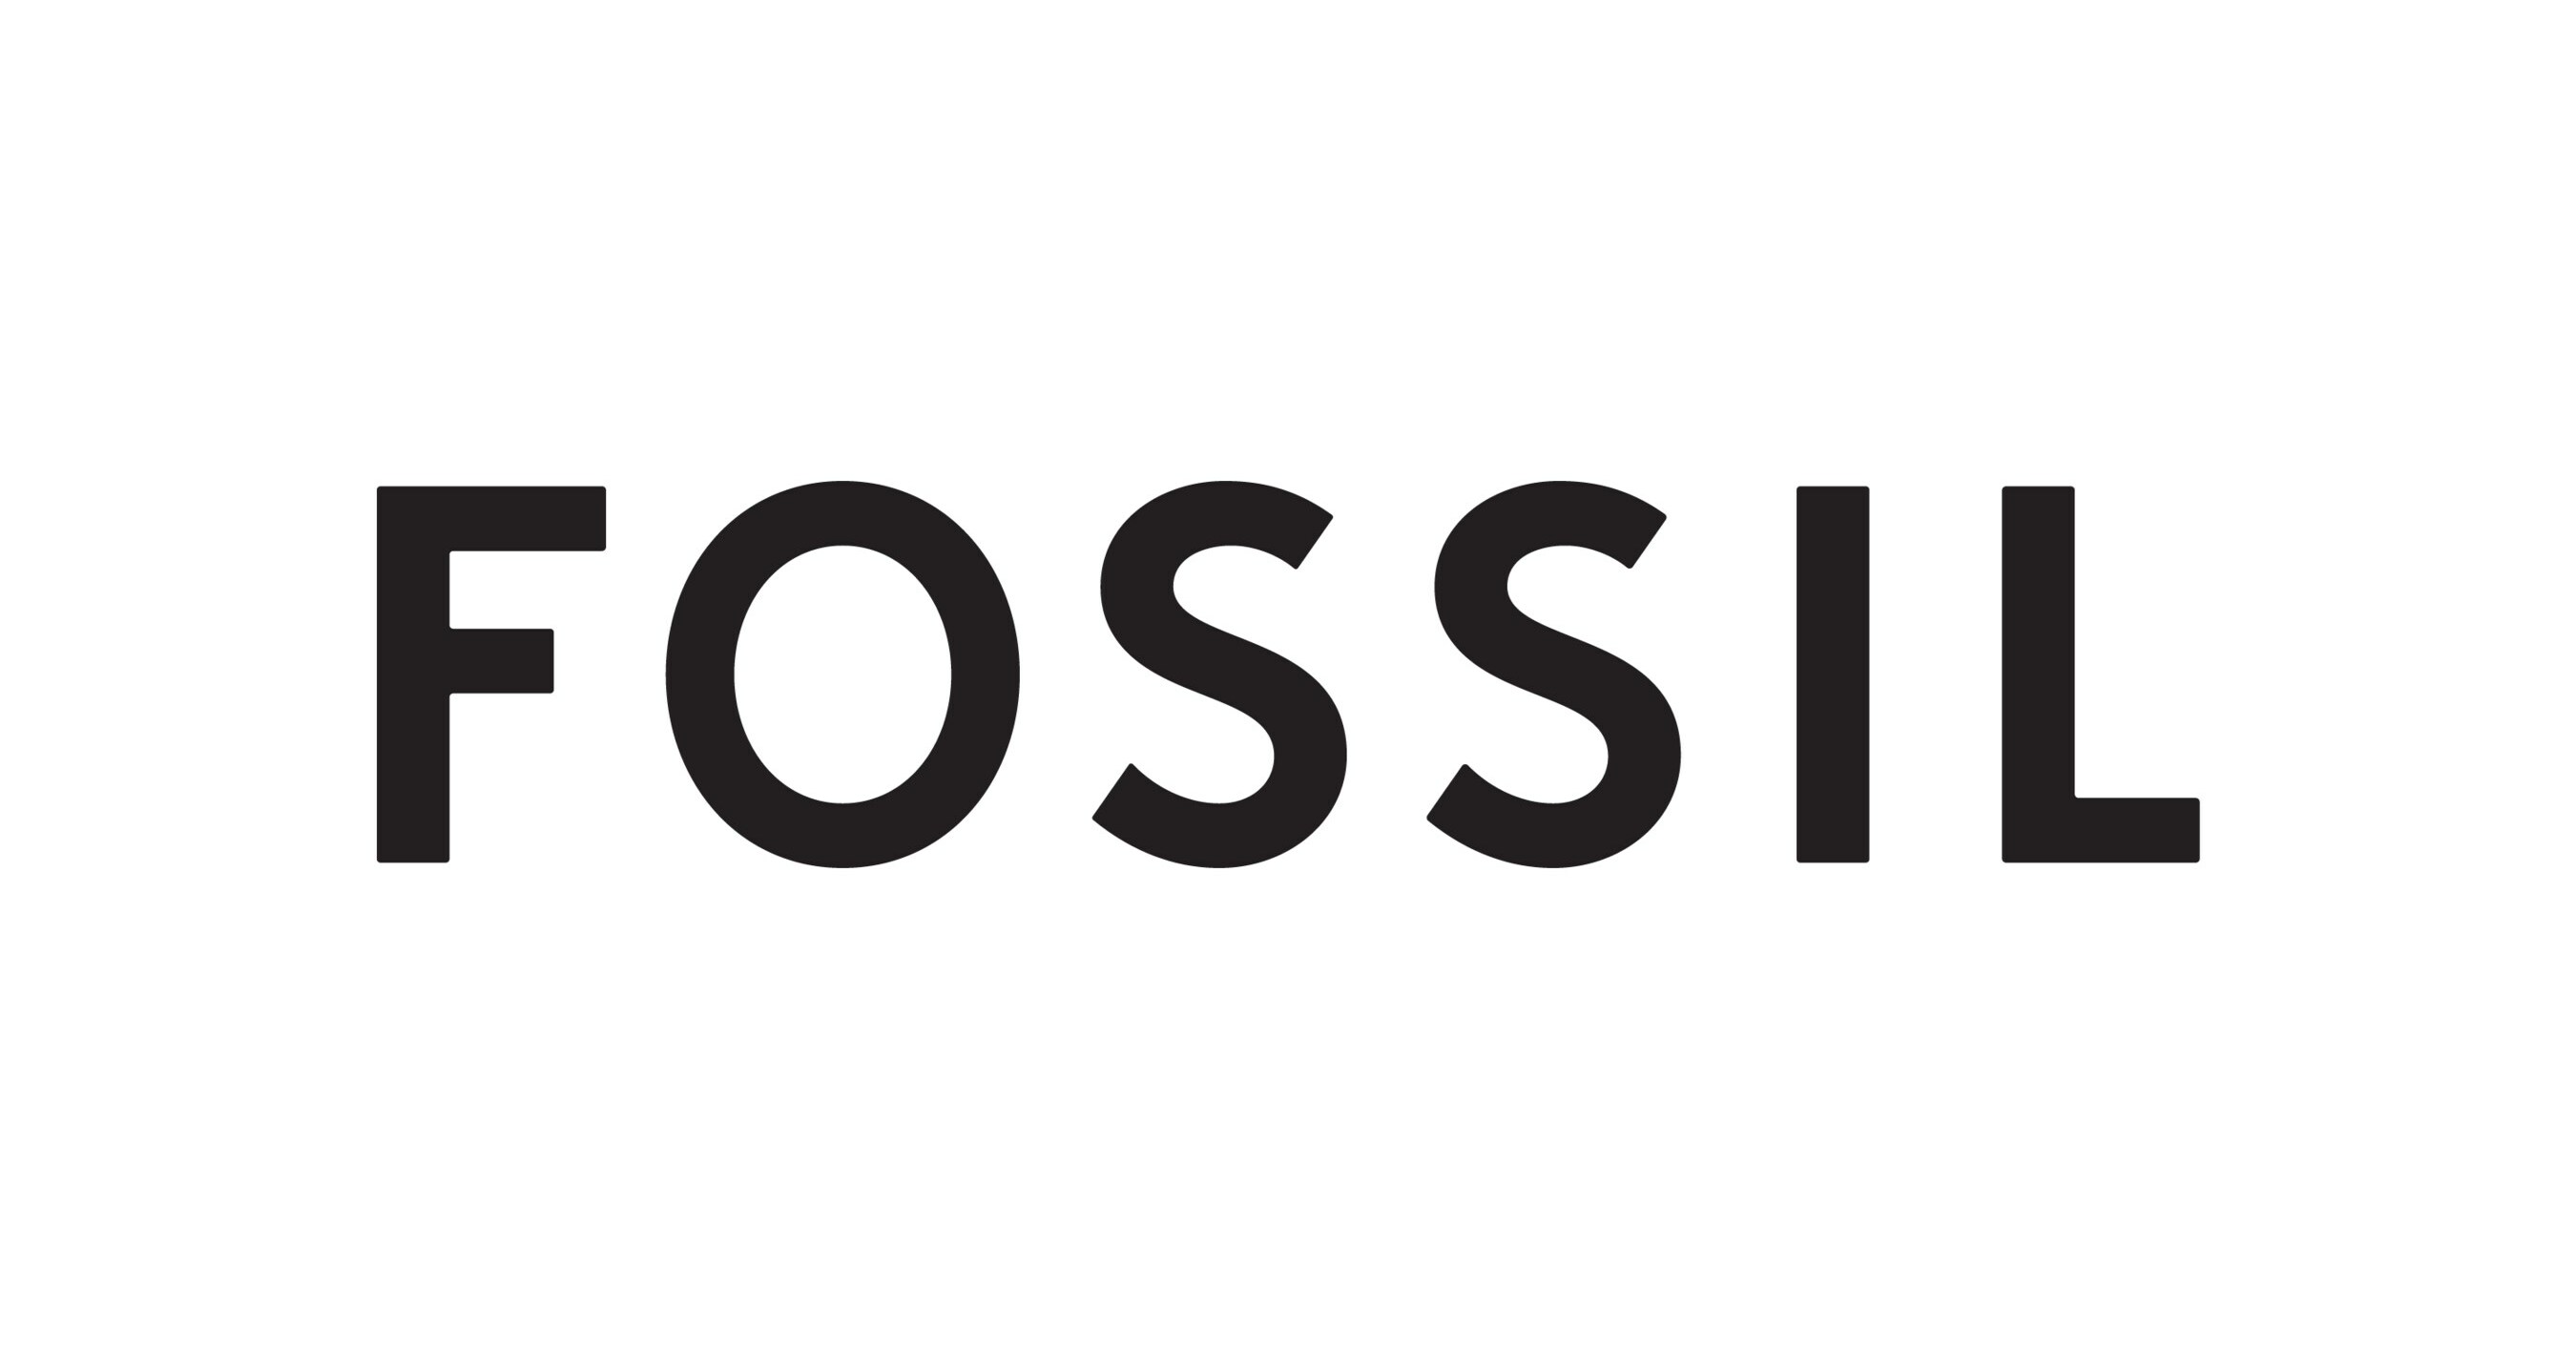 Fossil - Get free engraving and embossing!